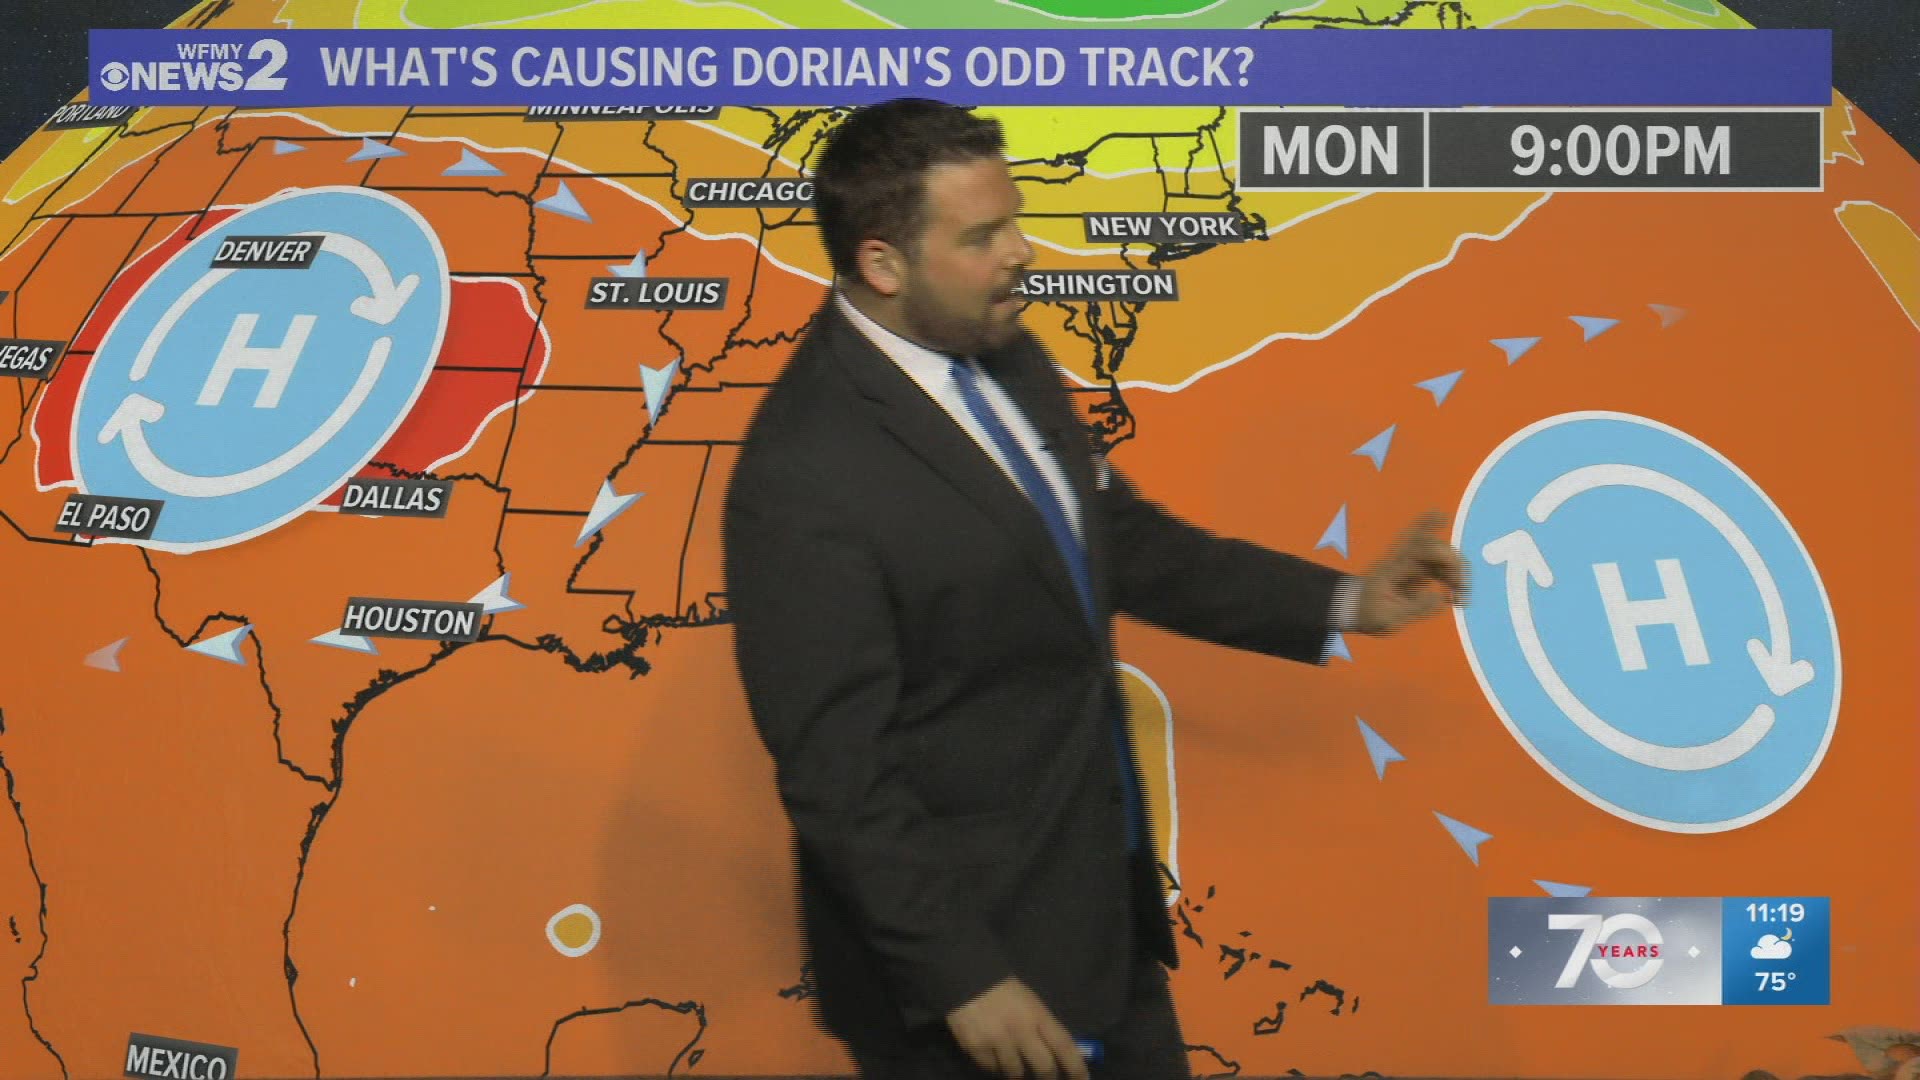 Hurricane Dorian pounded the Bahamas for over two days, sitting over the same areas for about 48 hours. WFMY Chief Meteorologist Tim Buckley explains.